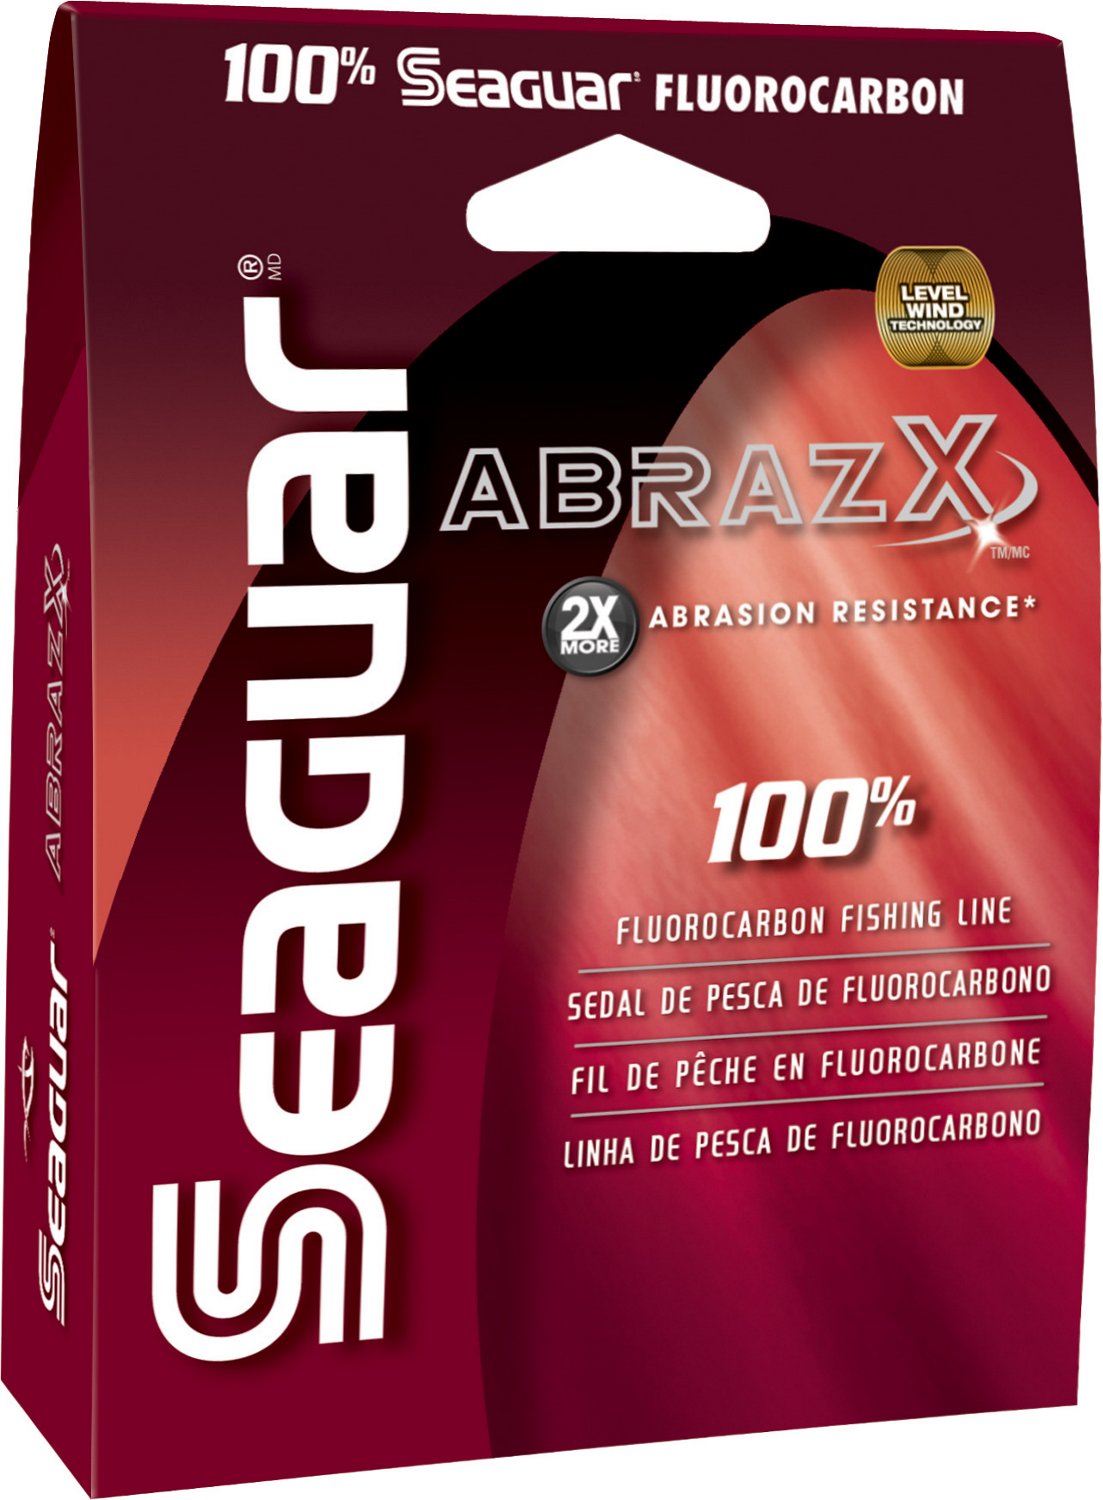 Seaguar Abrazx 200 yards Fluorocarbon Fishing Line | Academy